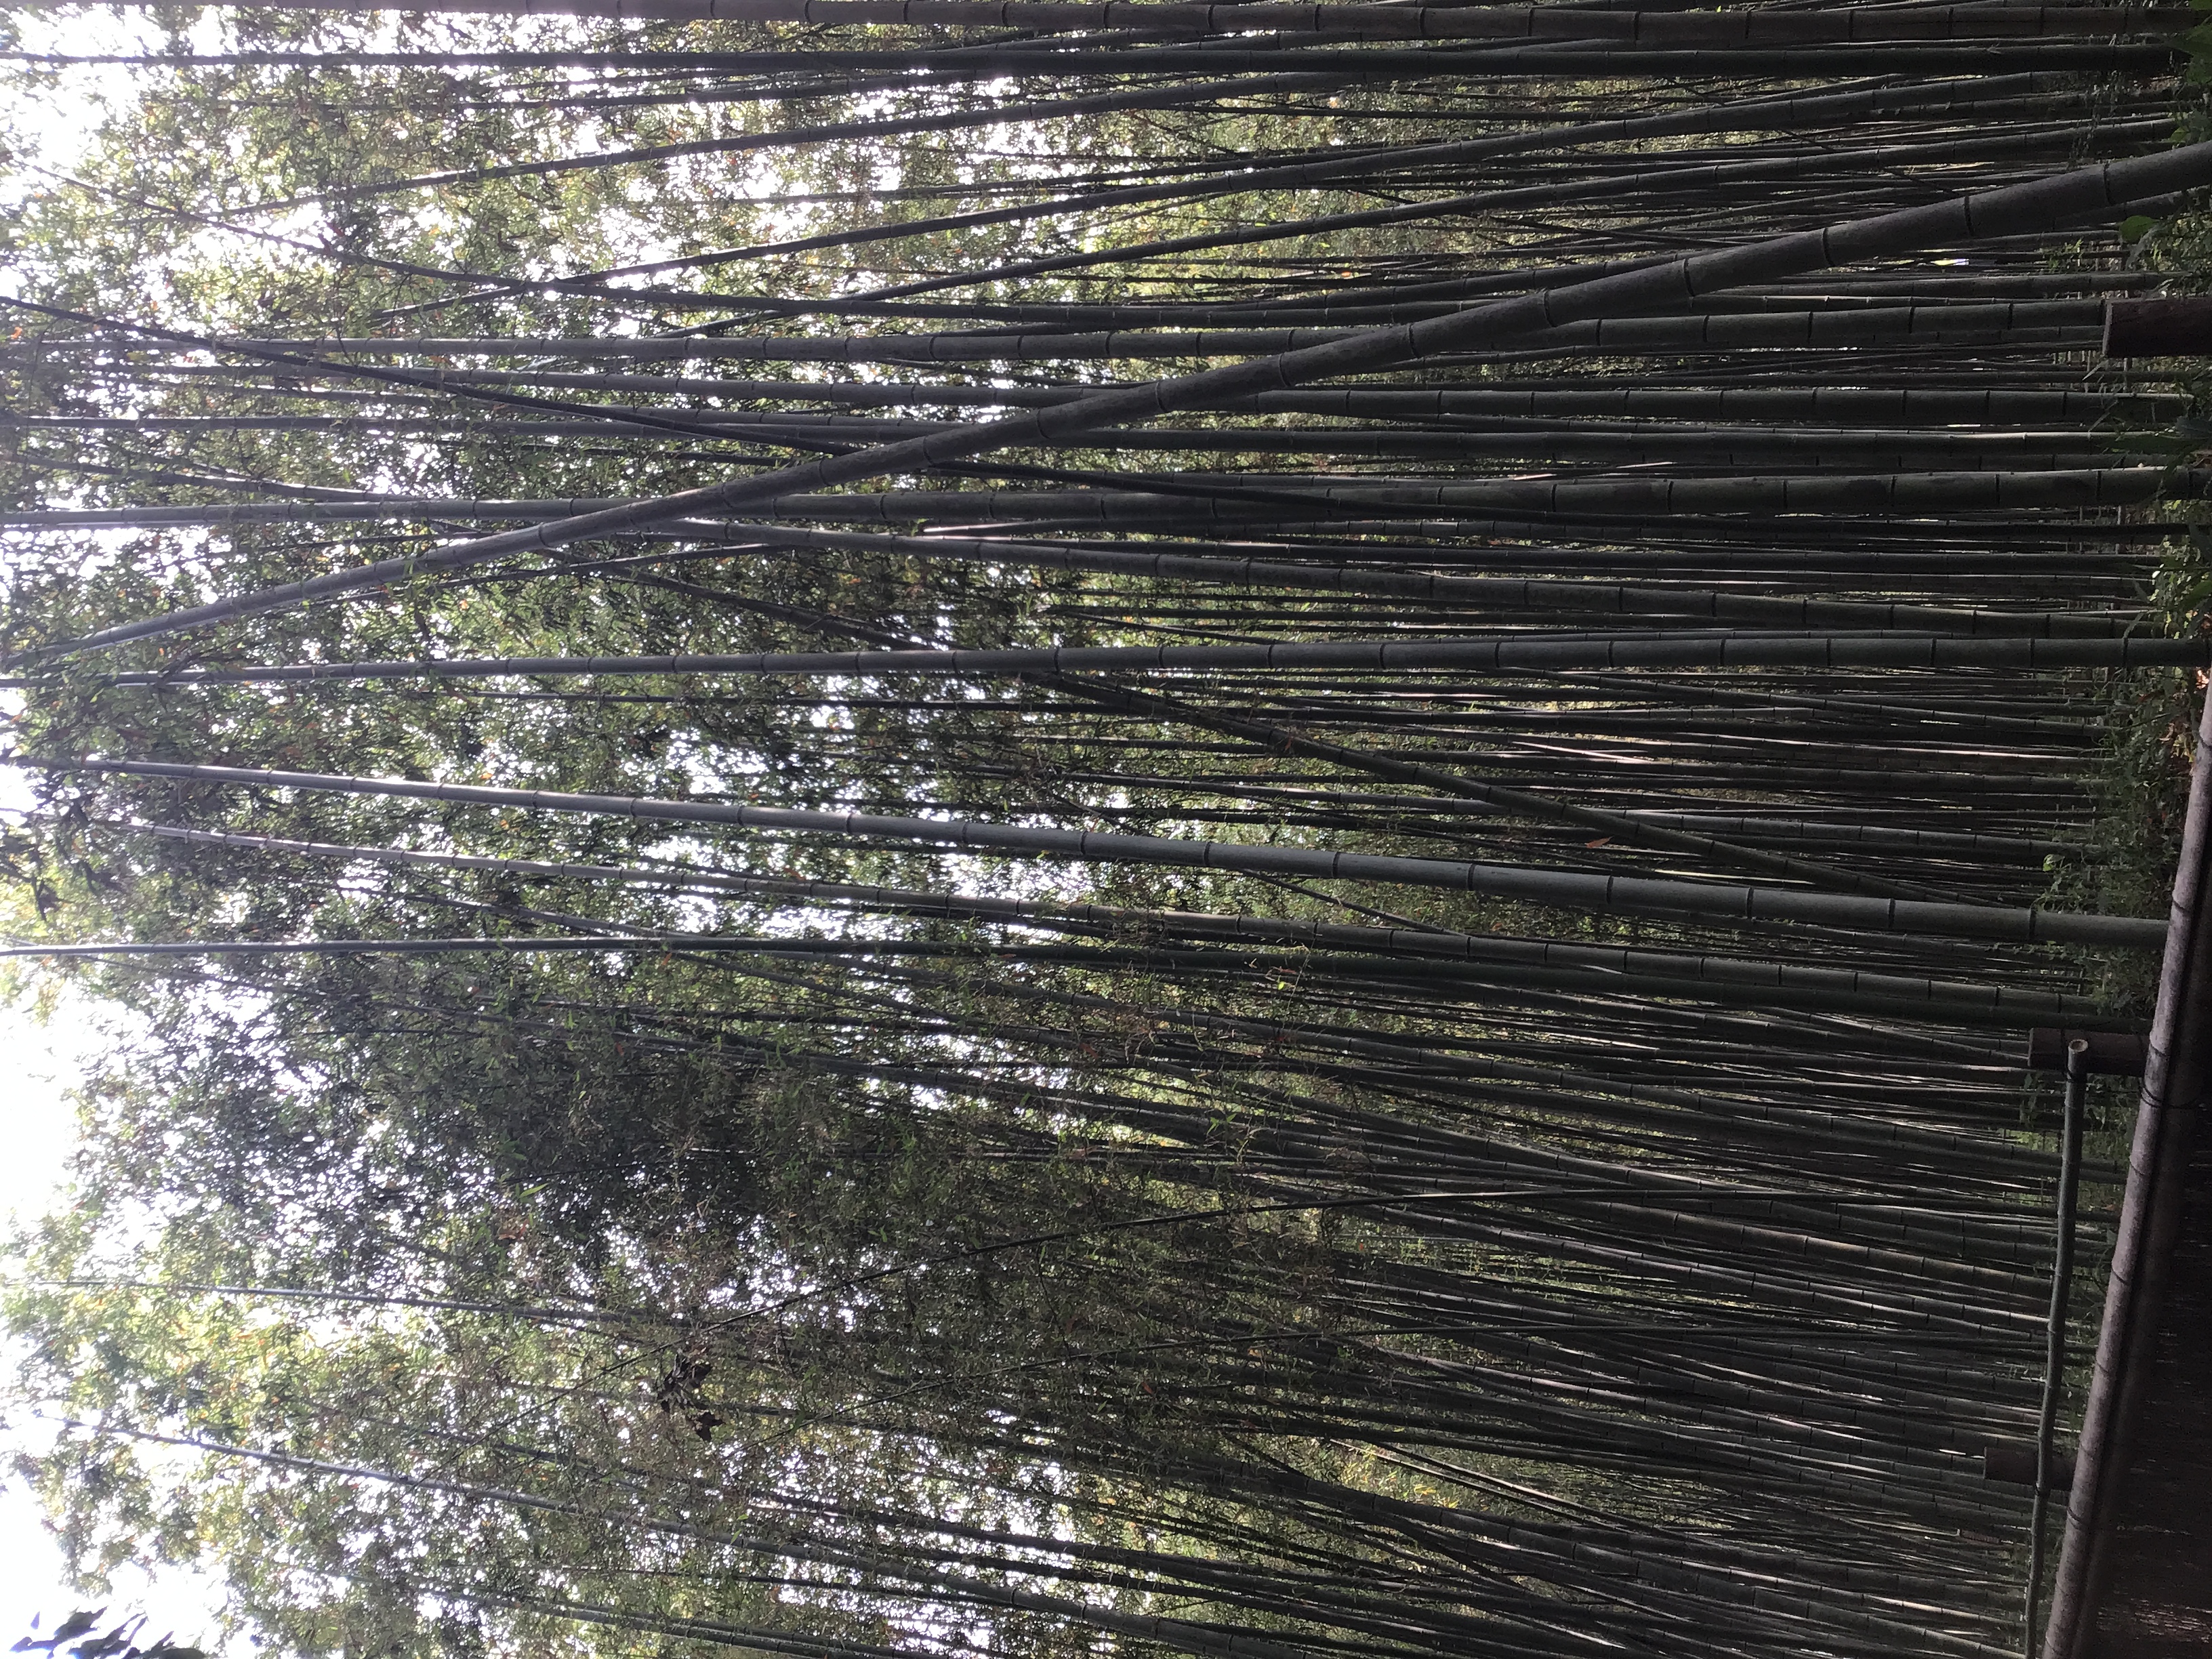 Really tall bamboo.  The only kind of bamboo.